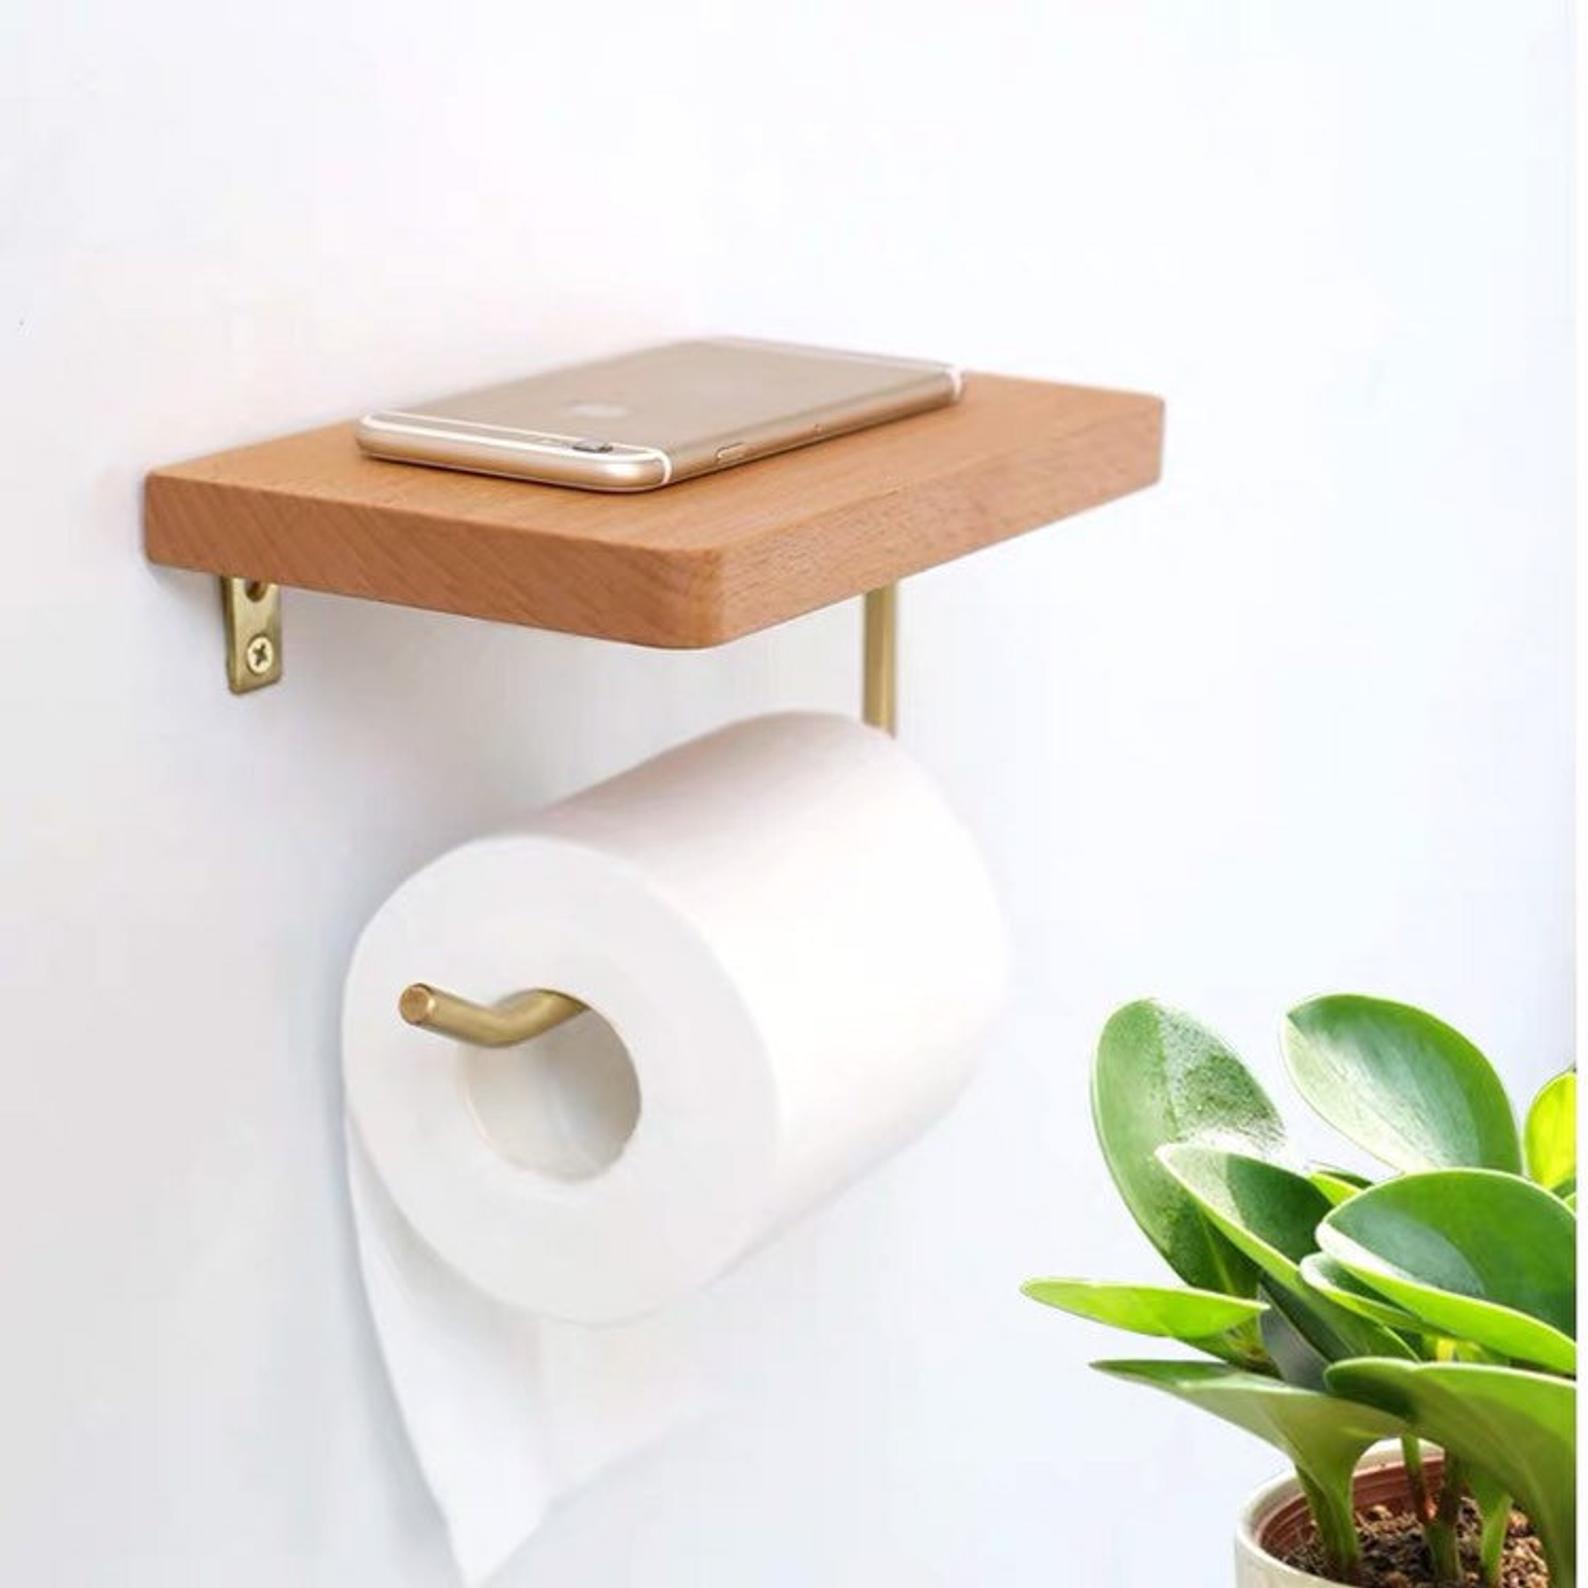 Wood-and-metal-modern-toilet-paper-holder-60489